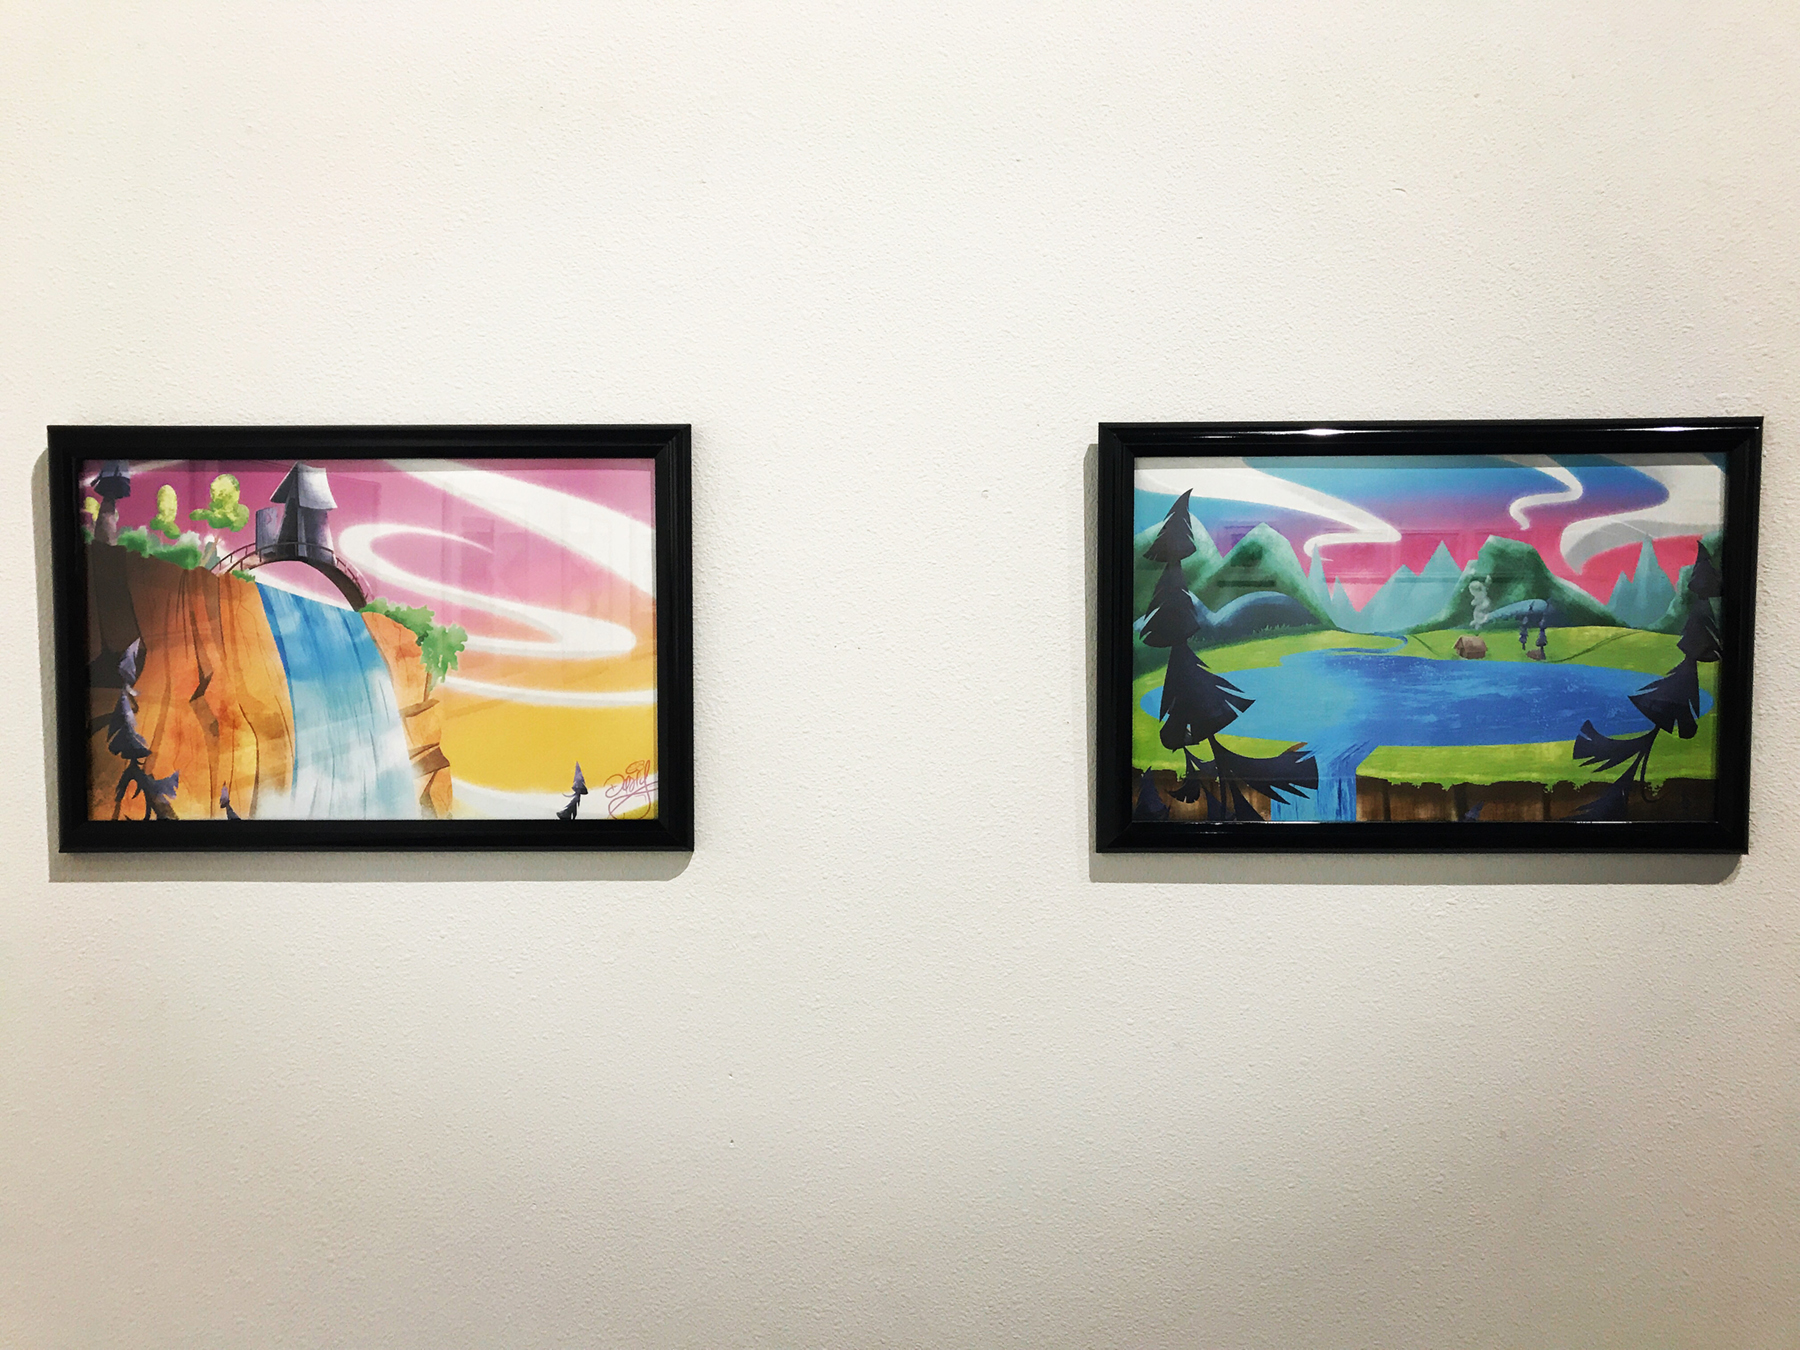 Two digital prints hang on the wall during David Glover's thesis show, Art of the Mudsuckle Ritual, image courtesy of the artist